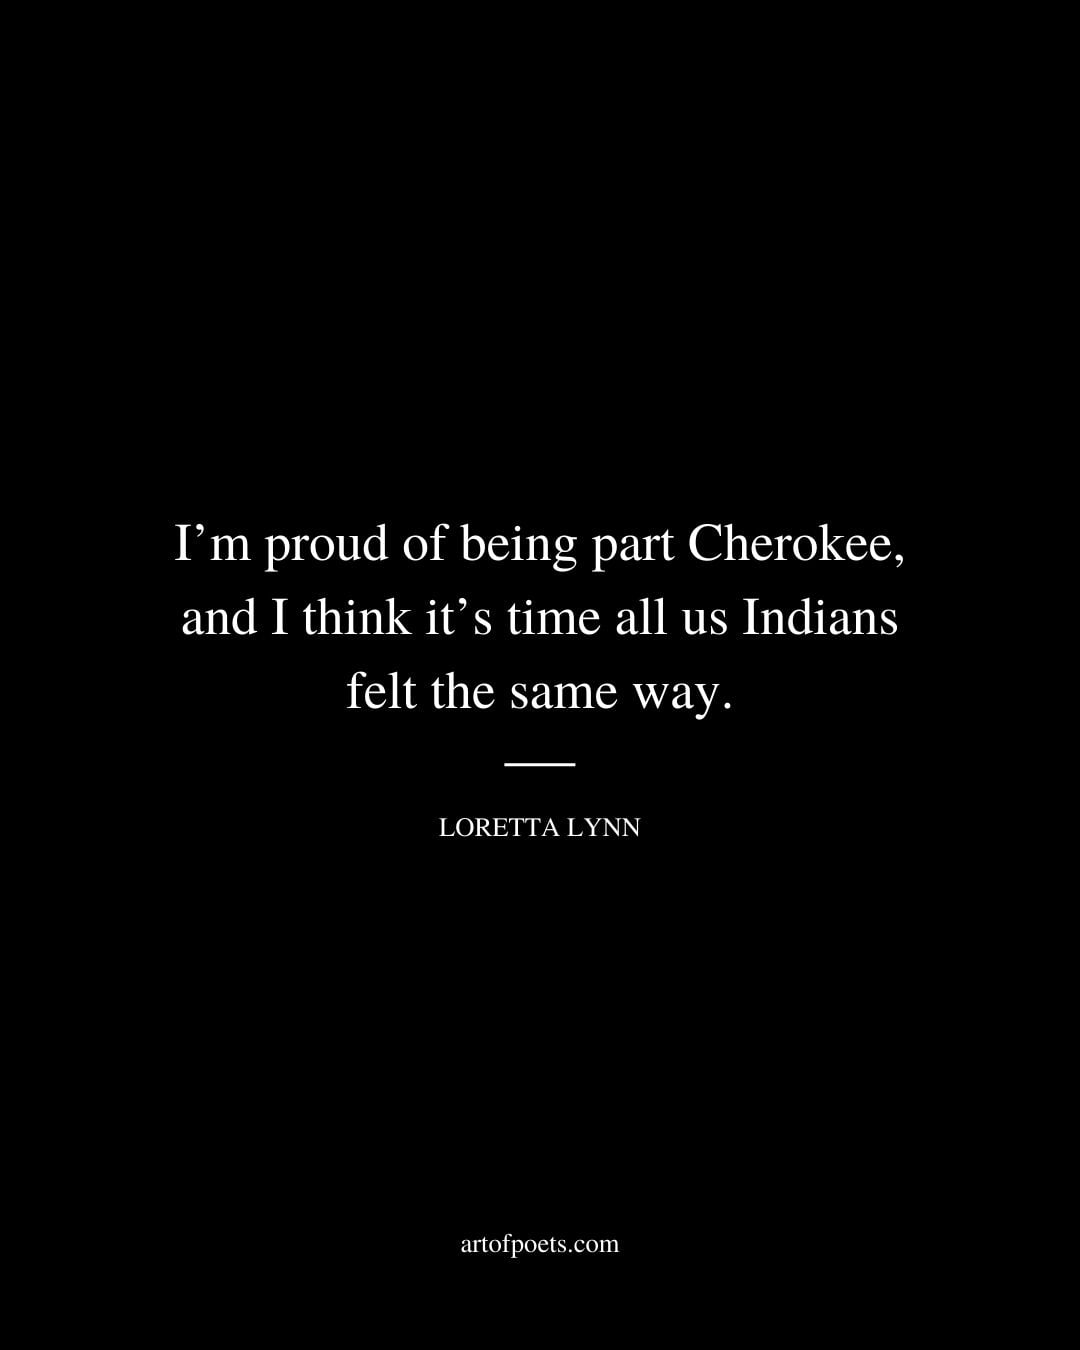 Im proud of being part Cherokee and I think its time all us Indians felt the same way. Loretta Lynn